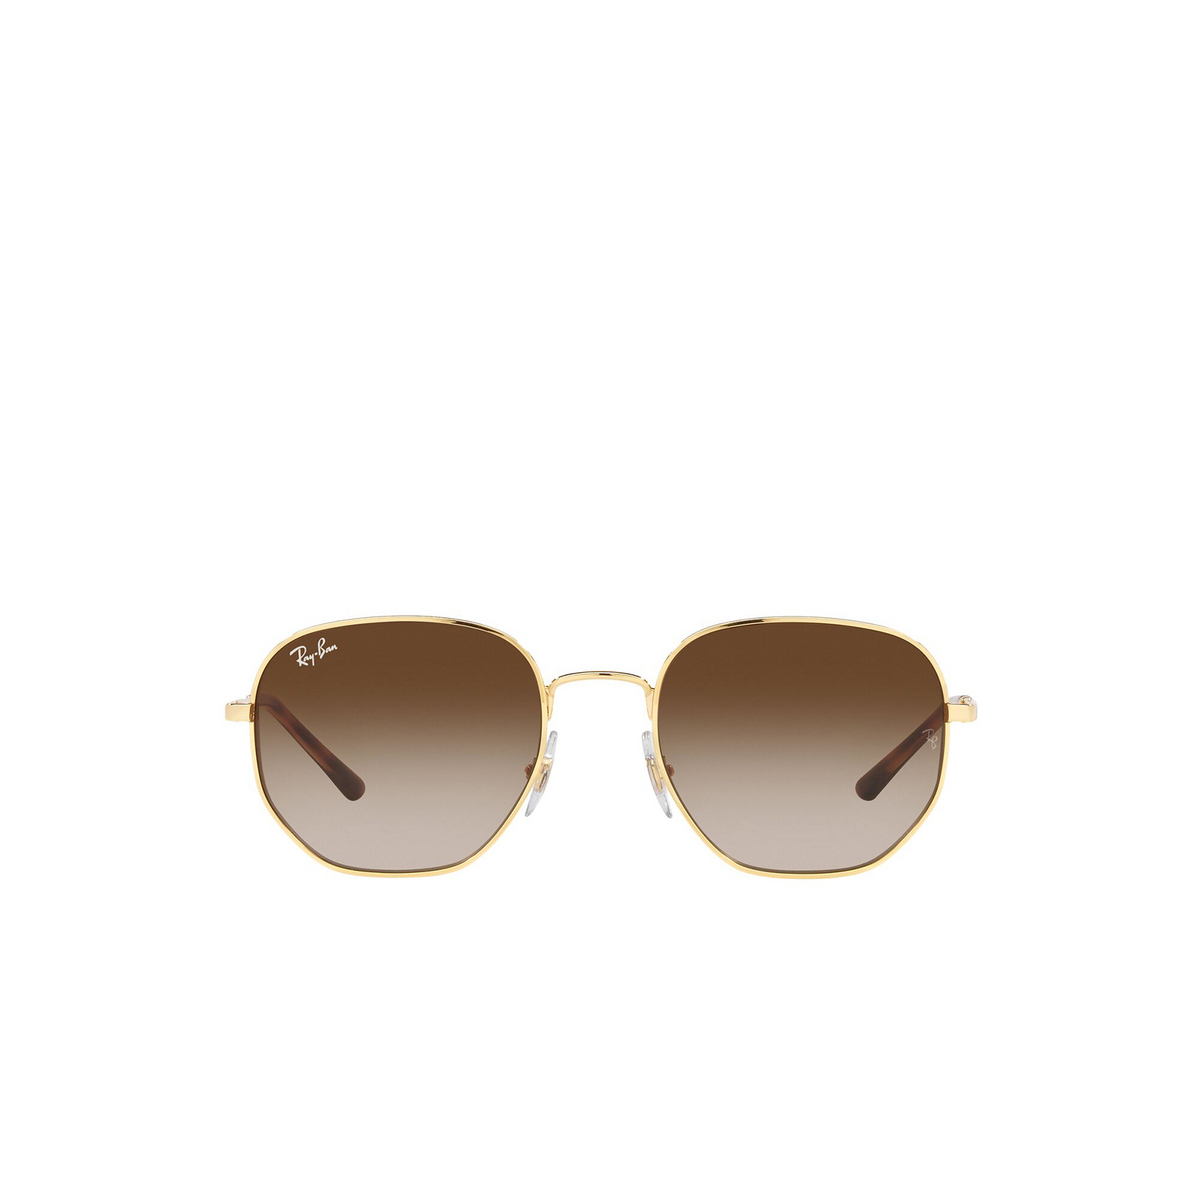 Ray-Ban® Irregular Sunglasses: RB3682 color Arista 001/13 - front view.